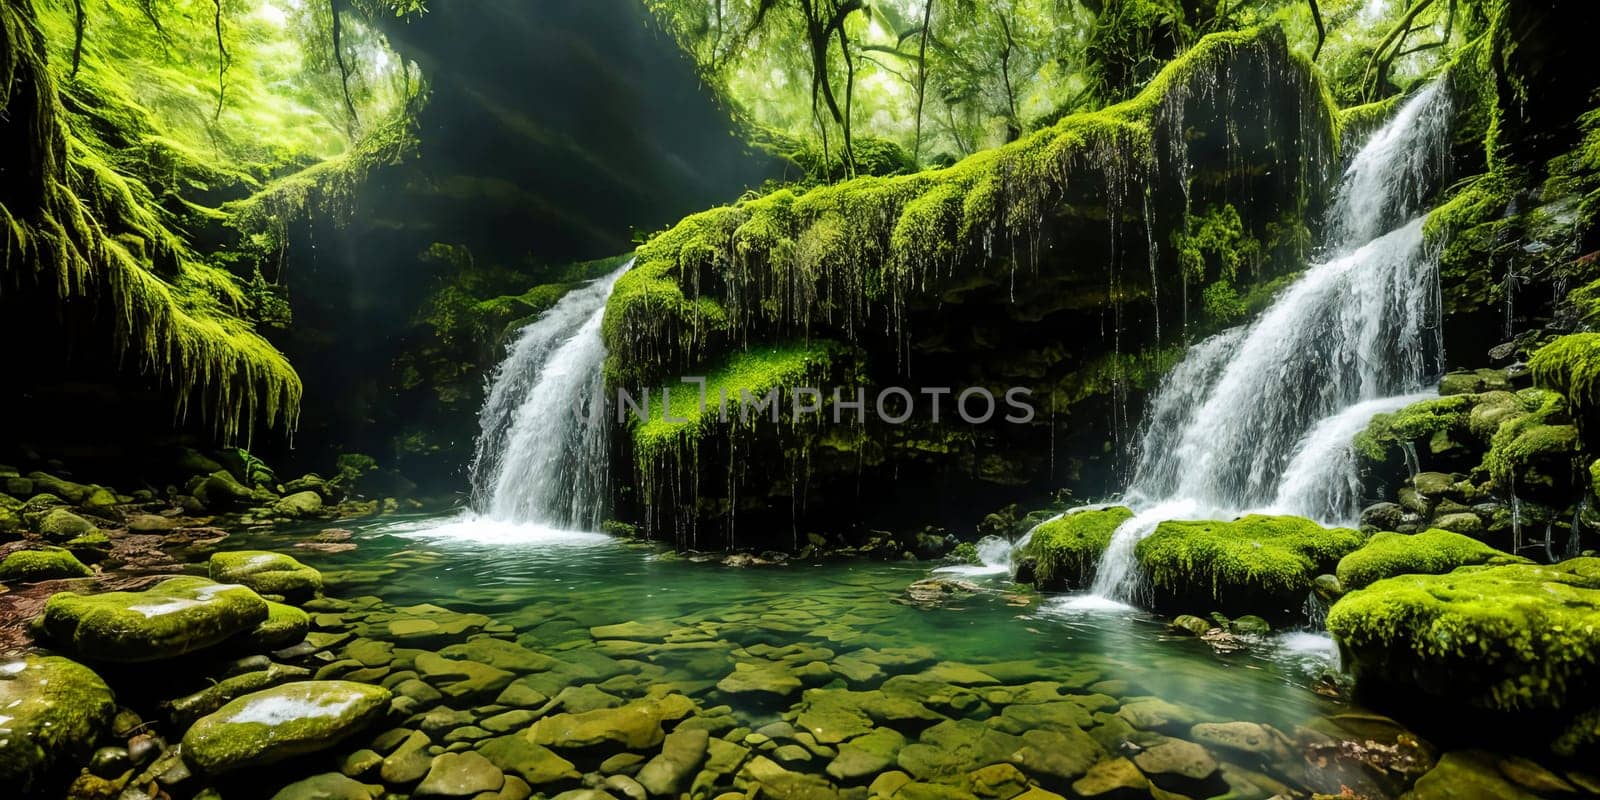 Enchanted Waterfall. A waterfall cascades down moss-covered rocks, revealing a secret grotto behind its veil. by GoodOlga